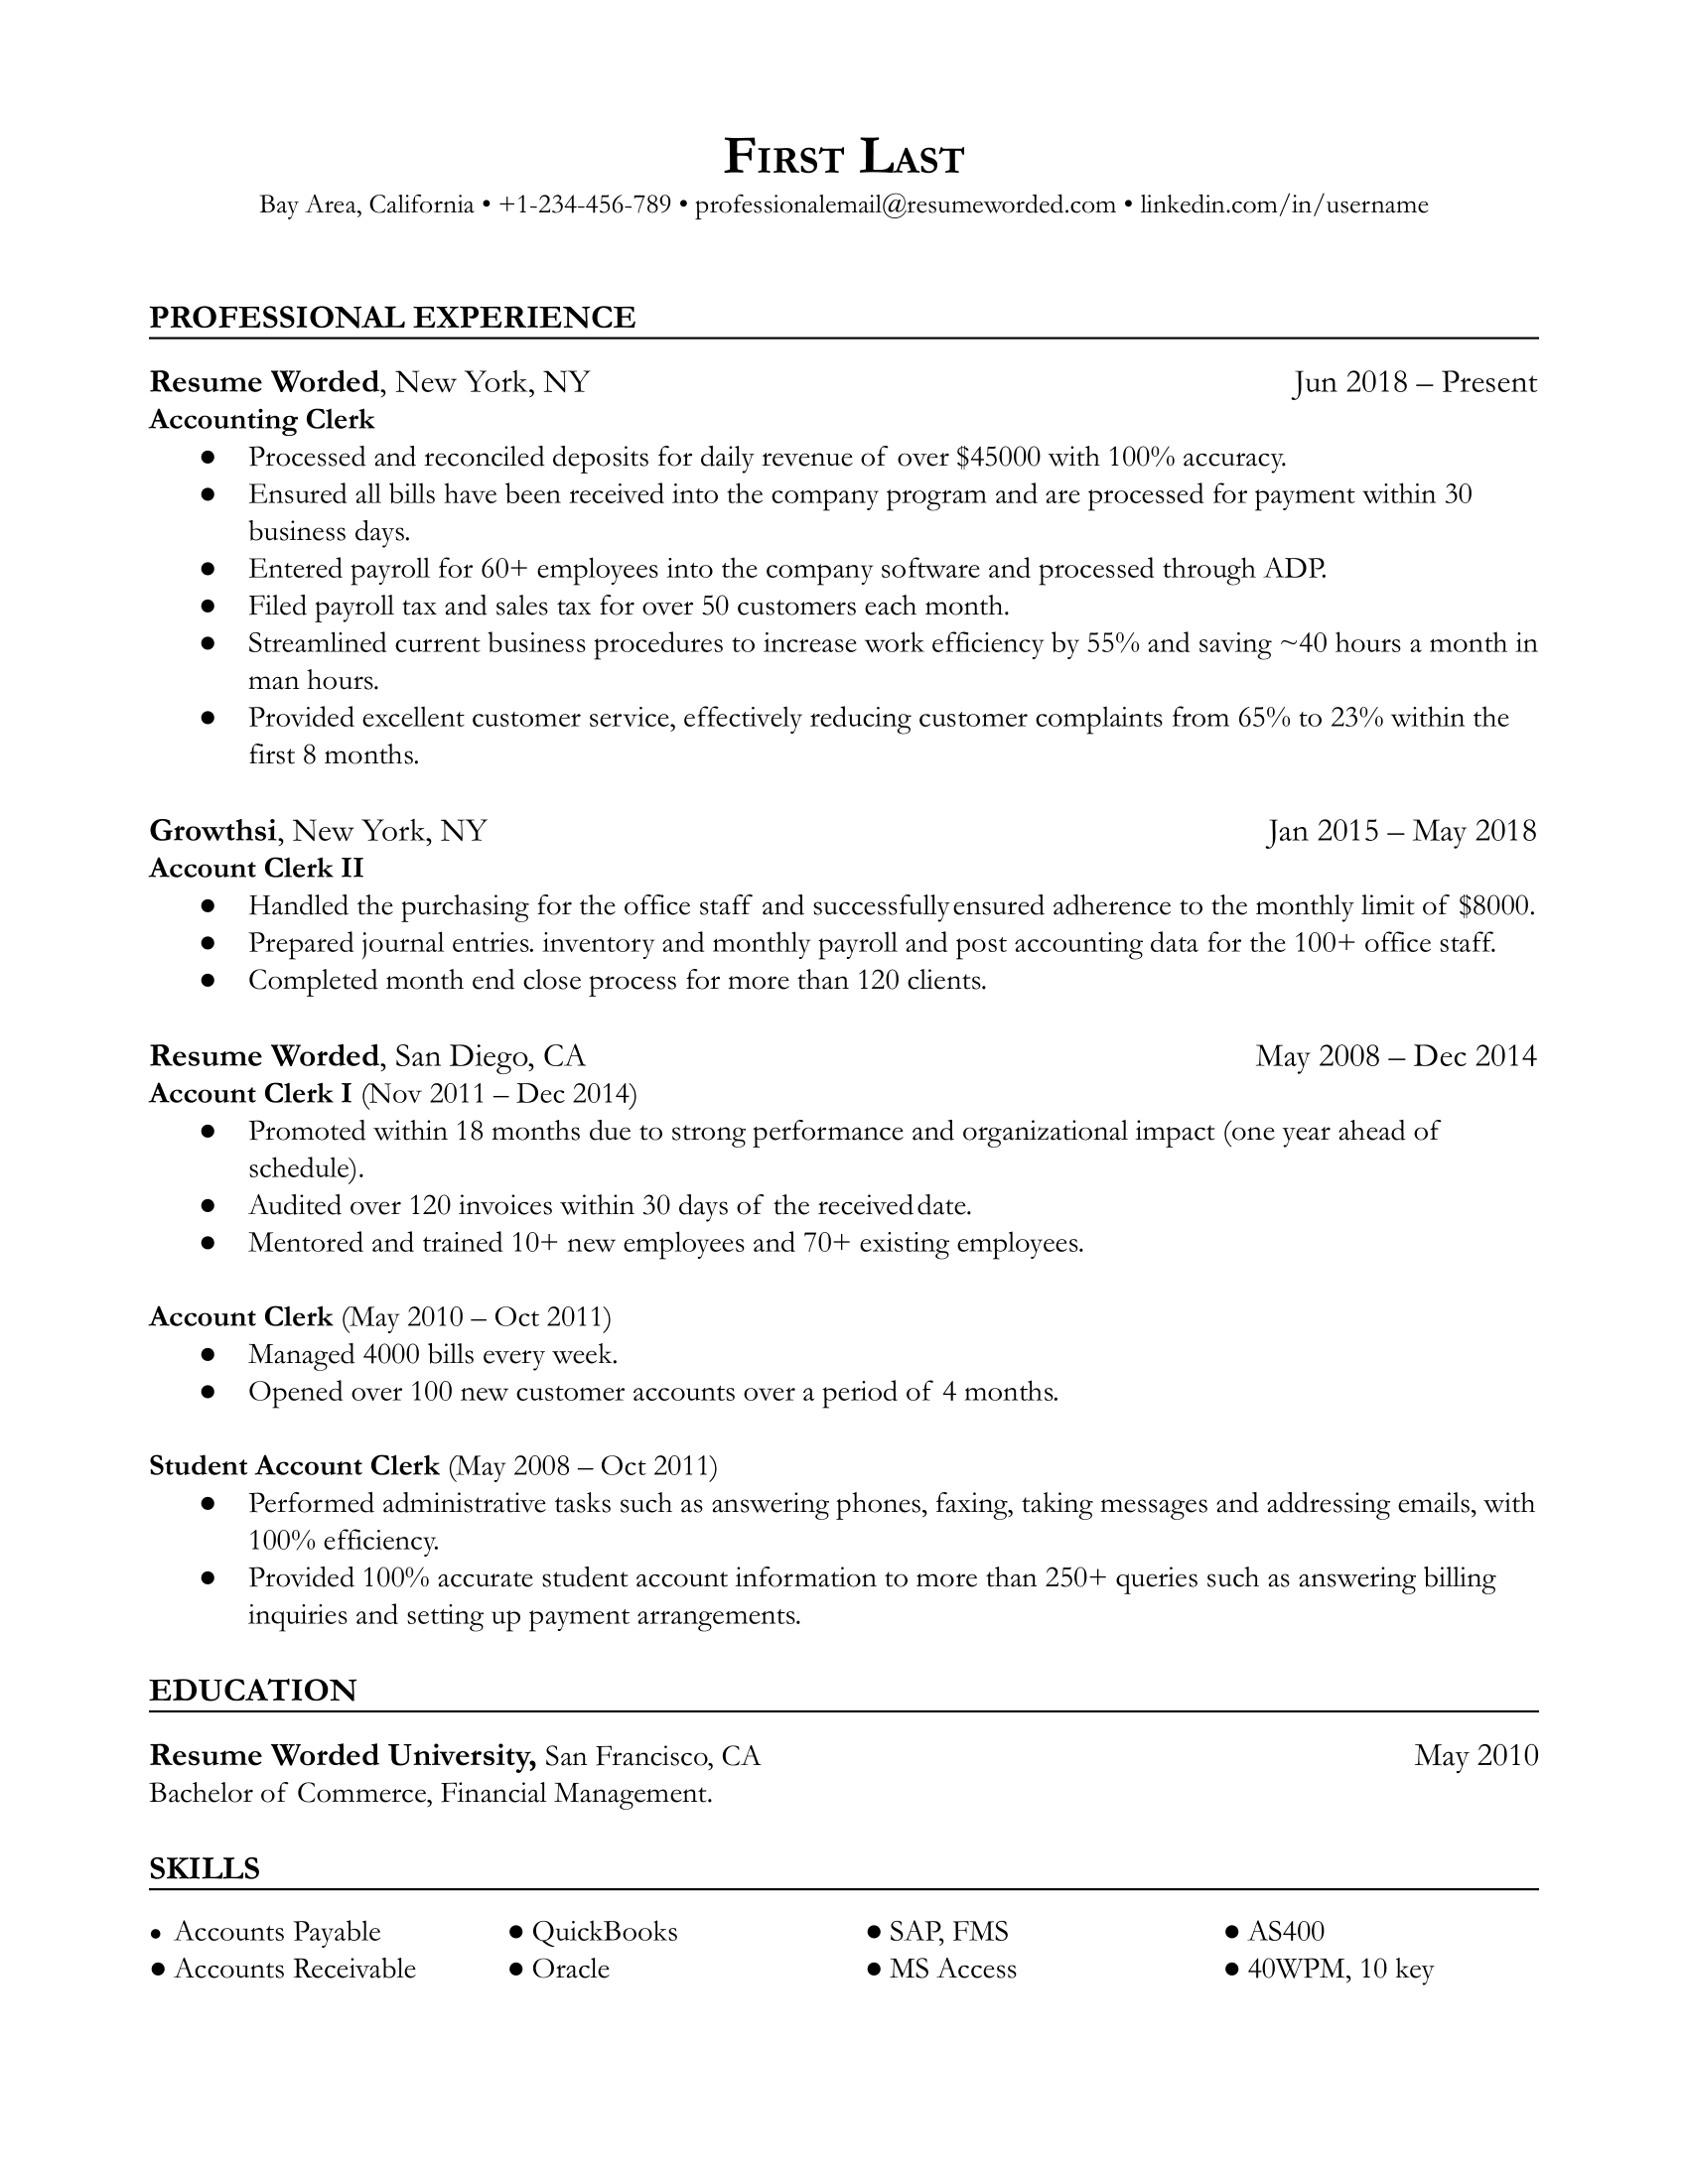 Accounting clerk resume with relevant work experience and strong action verbs